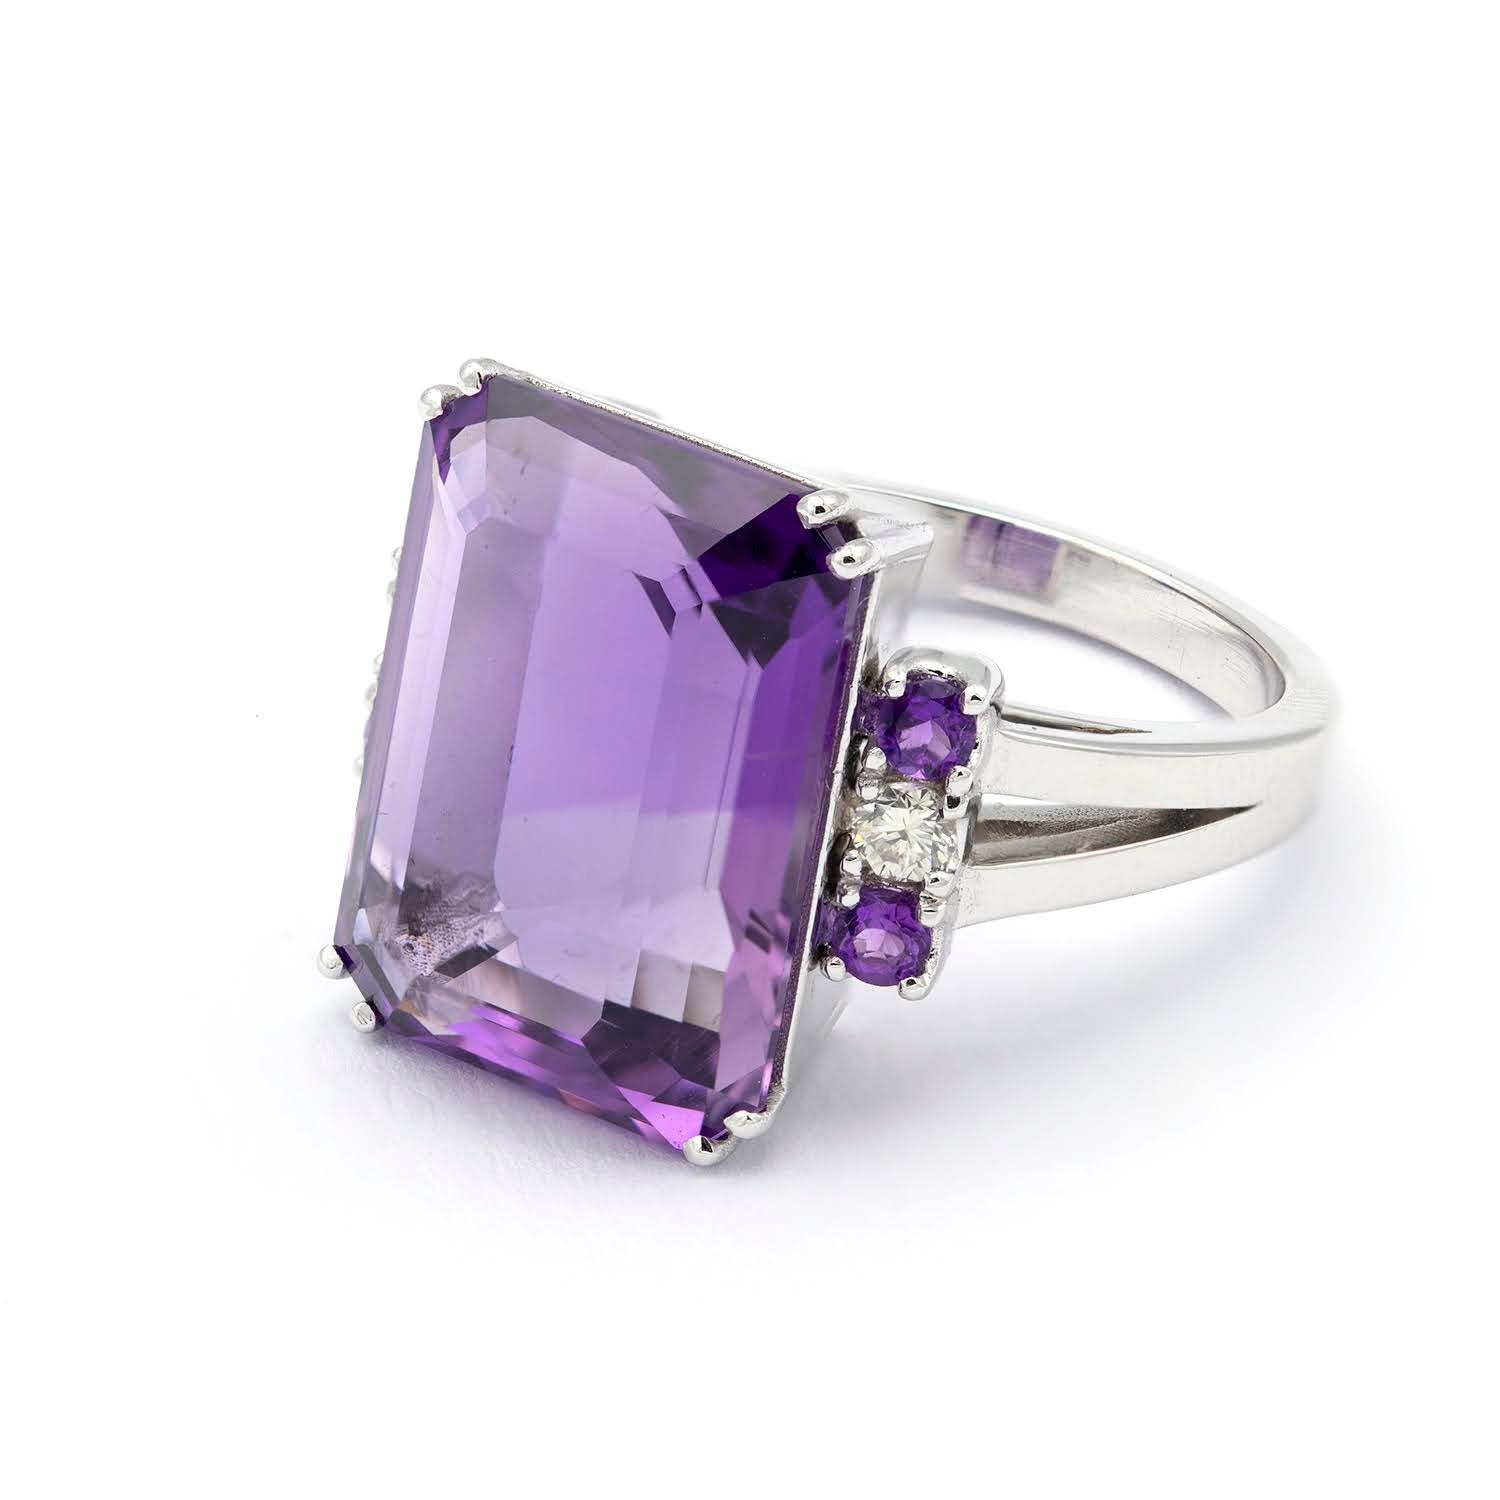 Amethyst 10.30ct and Diamonds 0.20ct Ring - Paris Collection